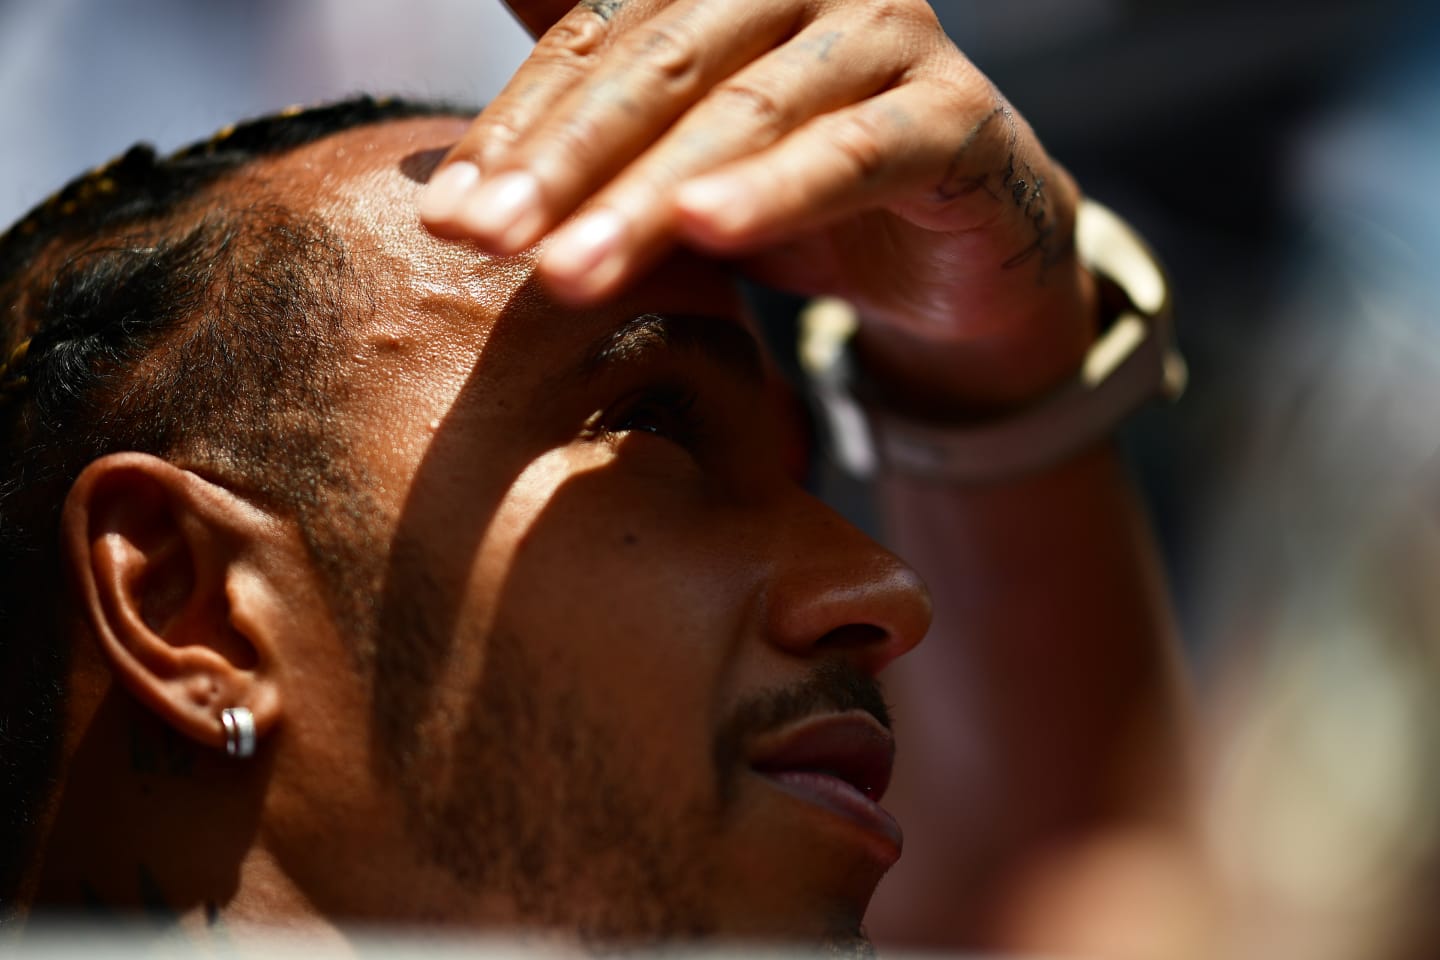 MIAMI, FLORIDA - MAY 08: Lewis Hamilton of Great Britain and Mercedes looks on in the Paddock